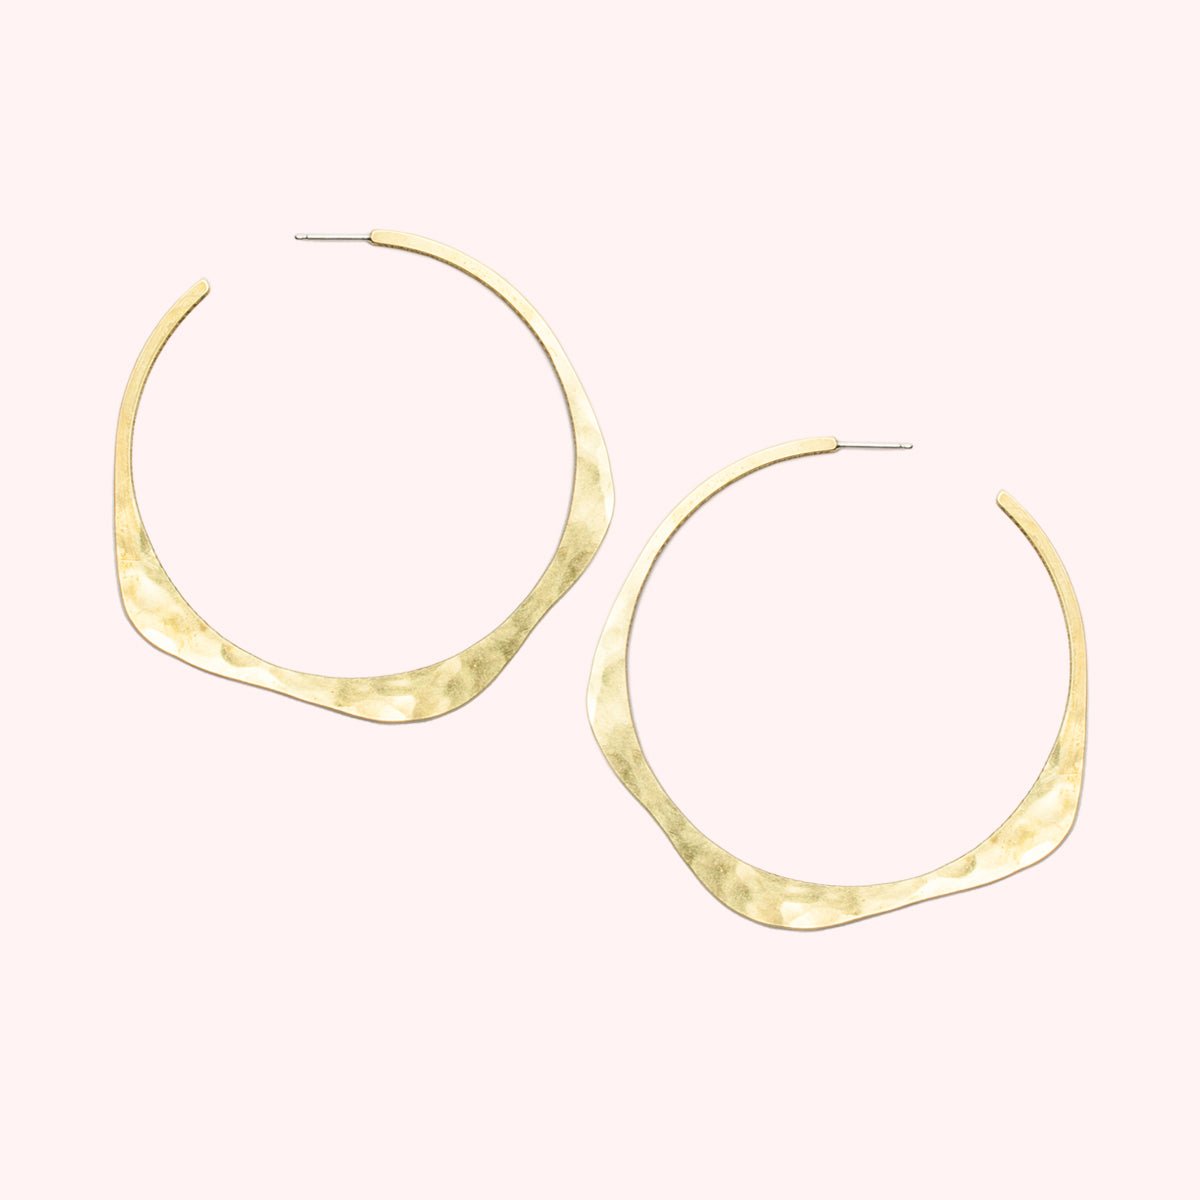 A brass hoop earring in a wave design with a hand hammered texture and sterling silver earring posts. The large Doble Hoop Earrings are designed and handcrafted in Portland, Oregon.